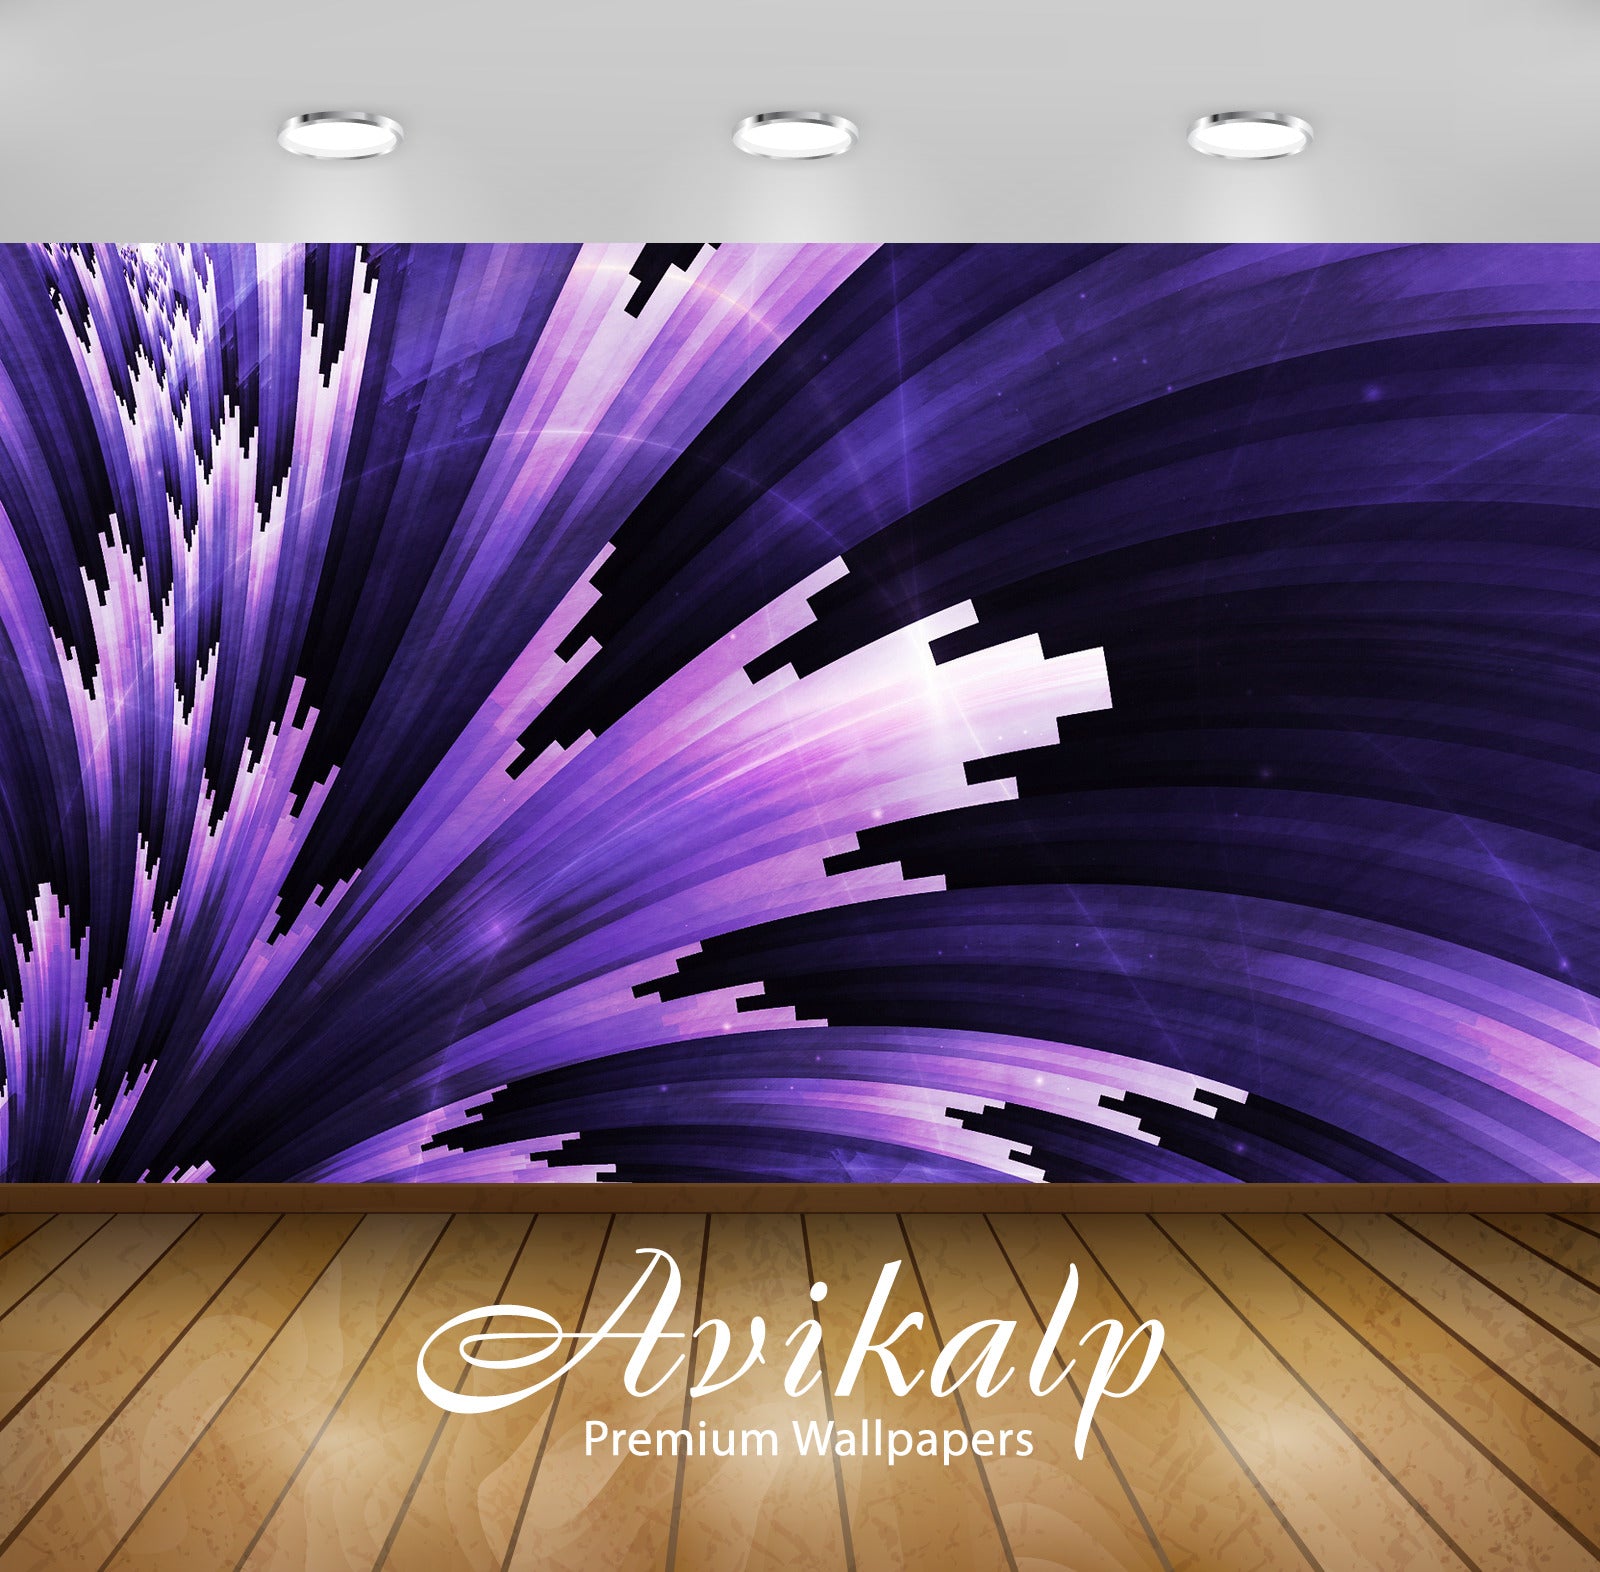 Avikalp Exclusive Awi4572 Purple Bars Full HD Wallpapers for Living room, Hall, Kids Room, Kitchen,